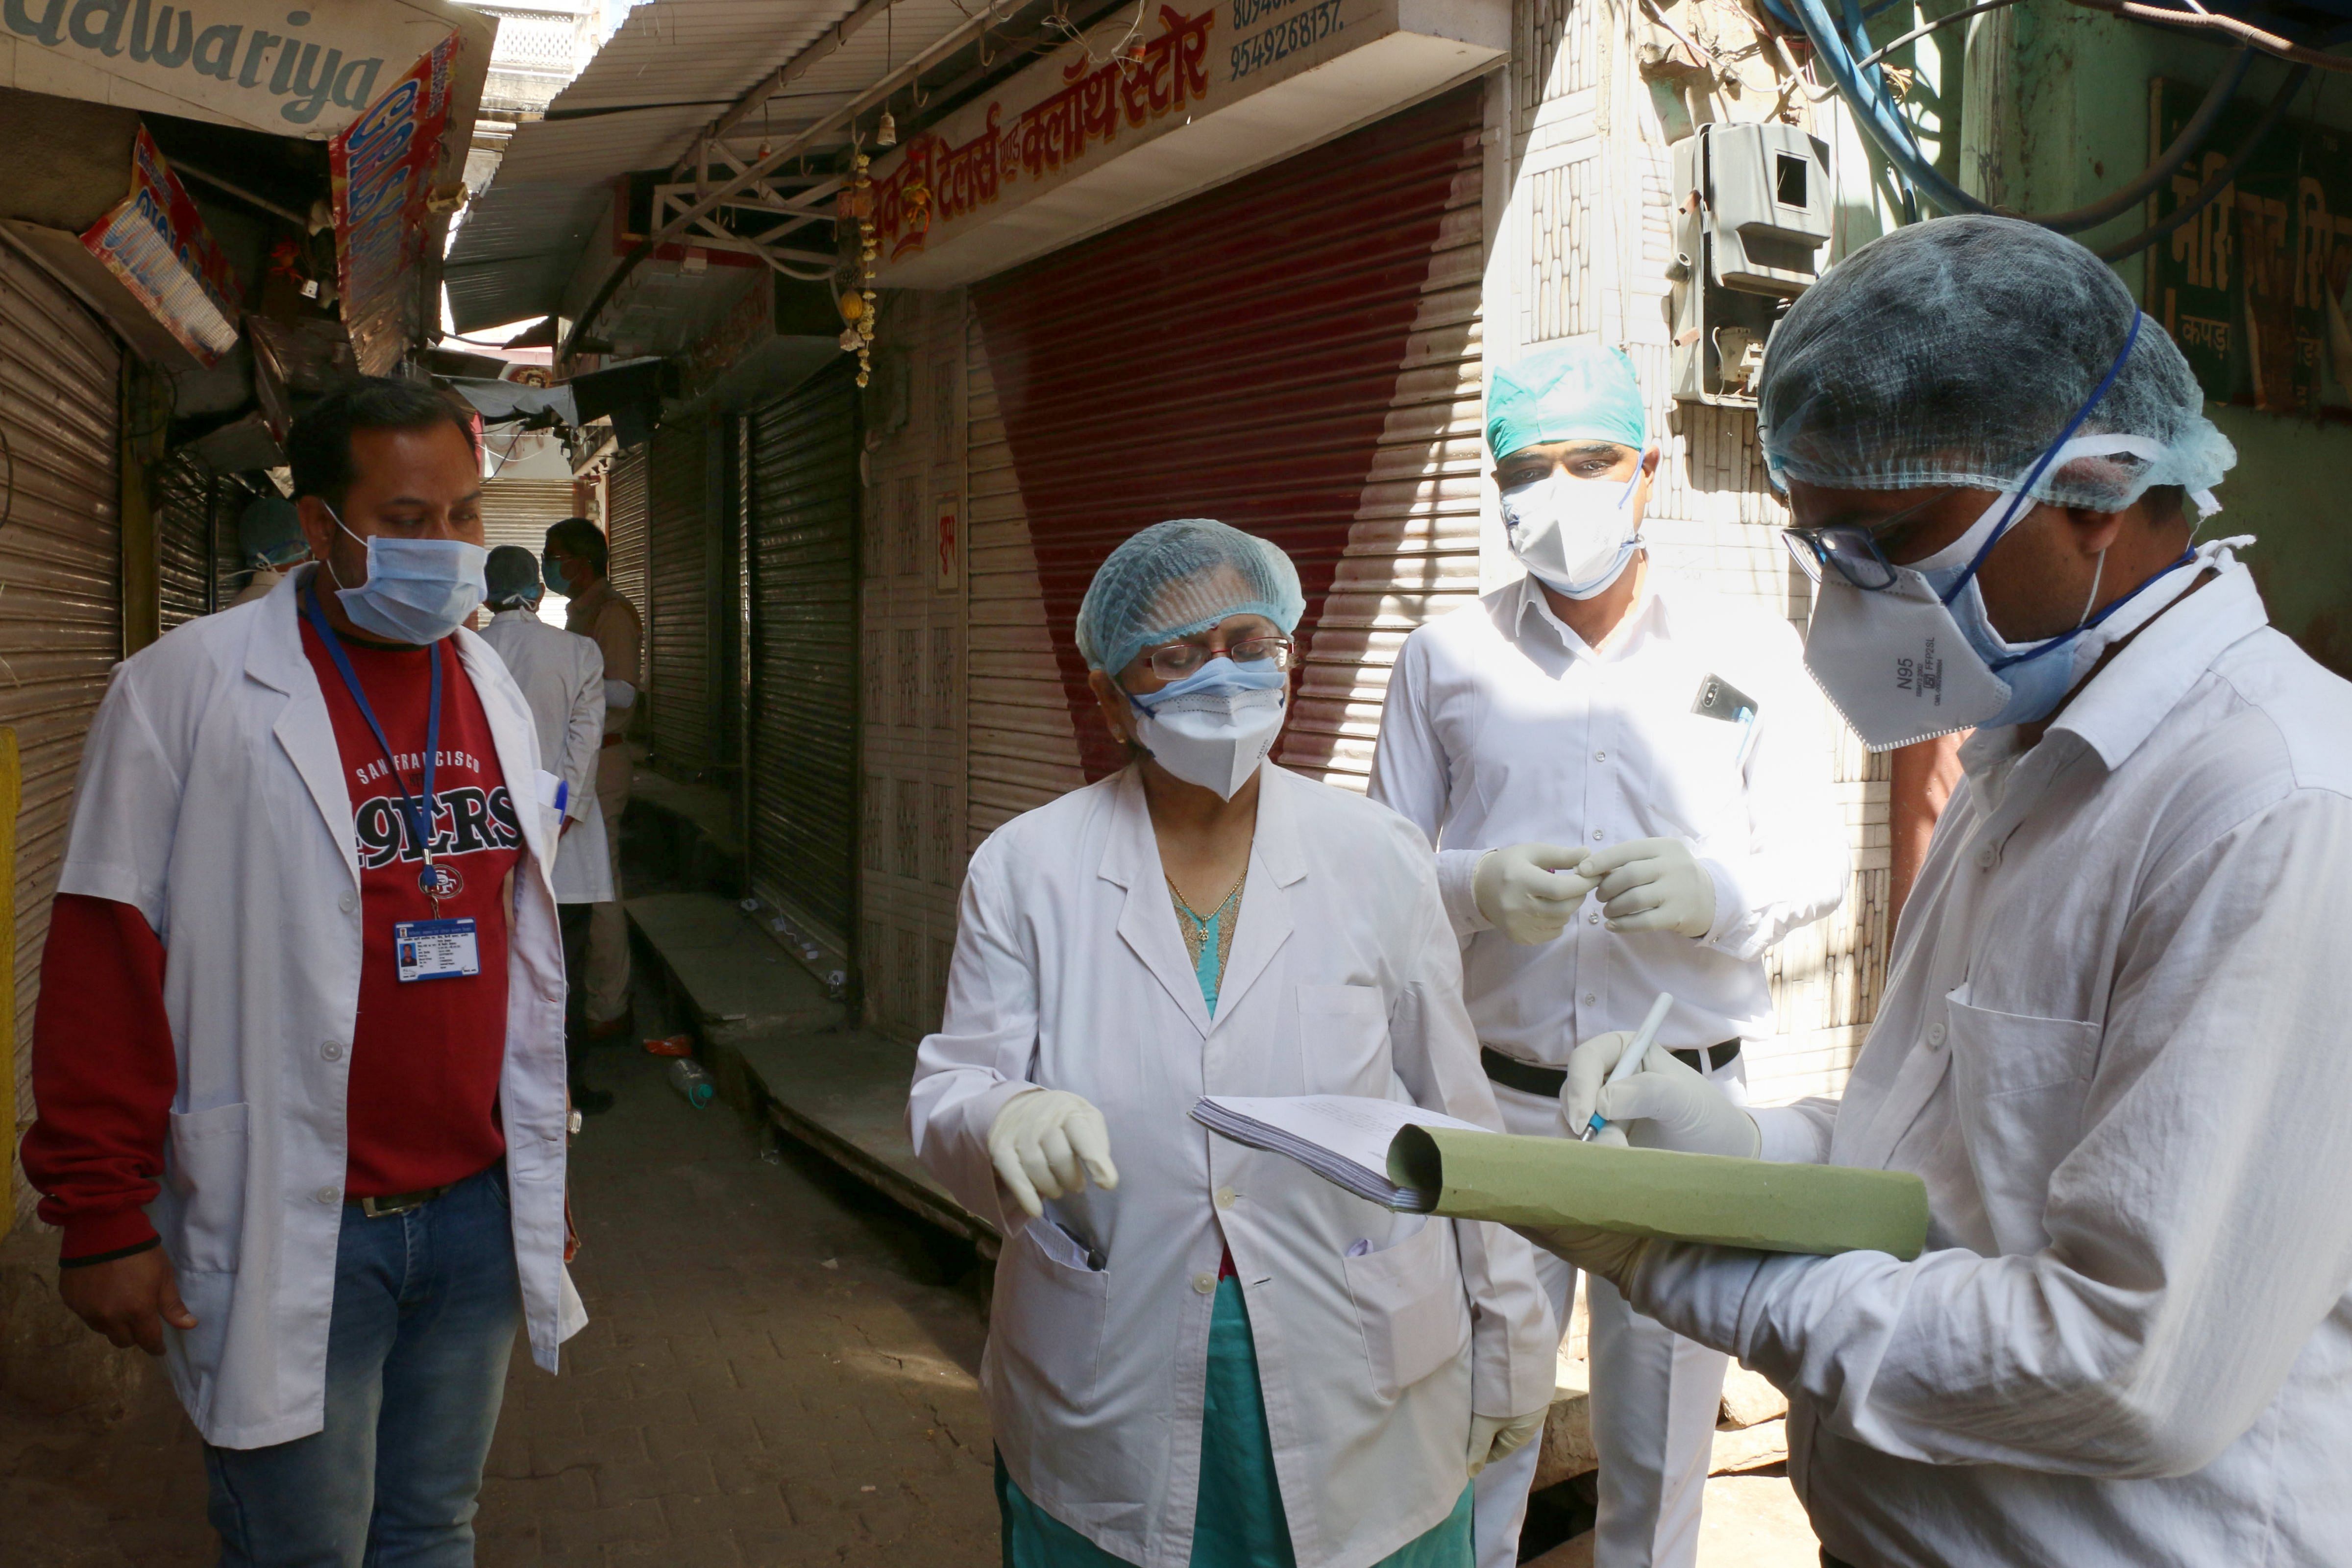 Health workers during a door-to-door survey for COVID 19 symptoms, during a nationwide lockdown imposed in the wake of the coronavirus pandemic. (PTI Photo)